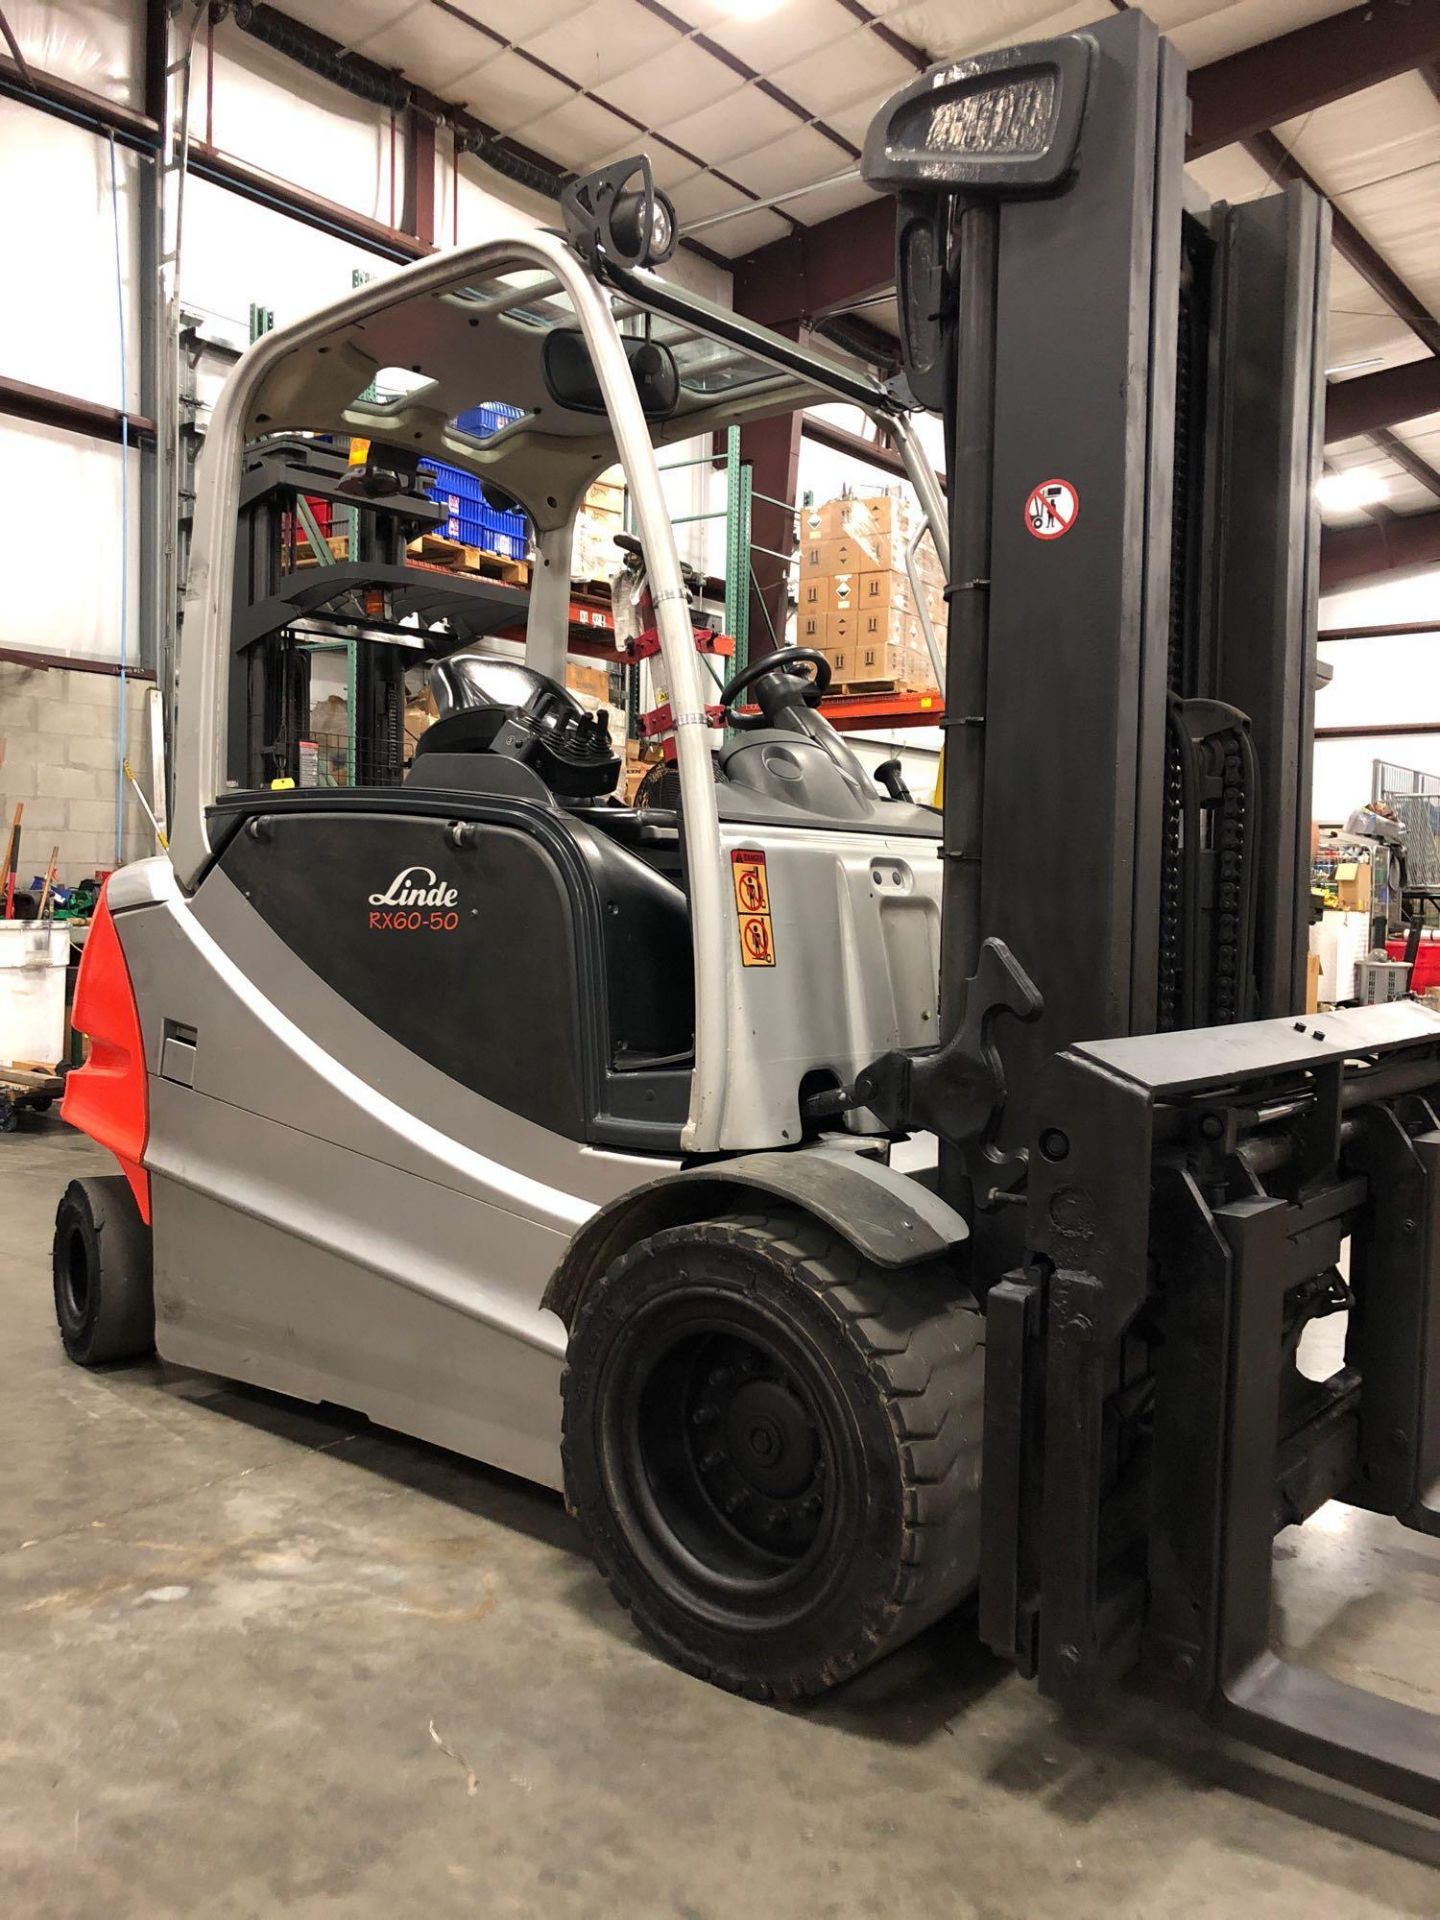 2009 LINDE ELECTRIC FORKLIFT MODEL RX60-50, 8,000 LB WEIGHT CAP - Image 3 of 11